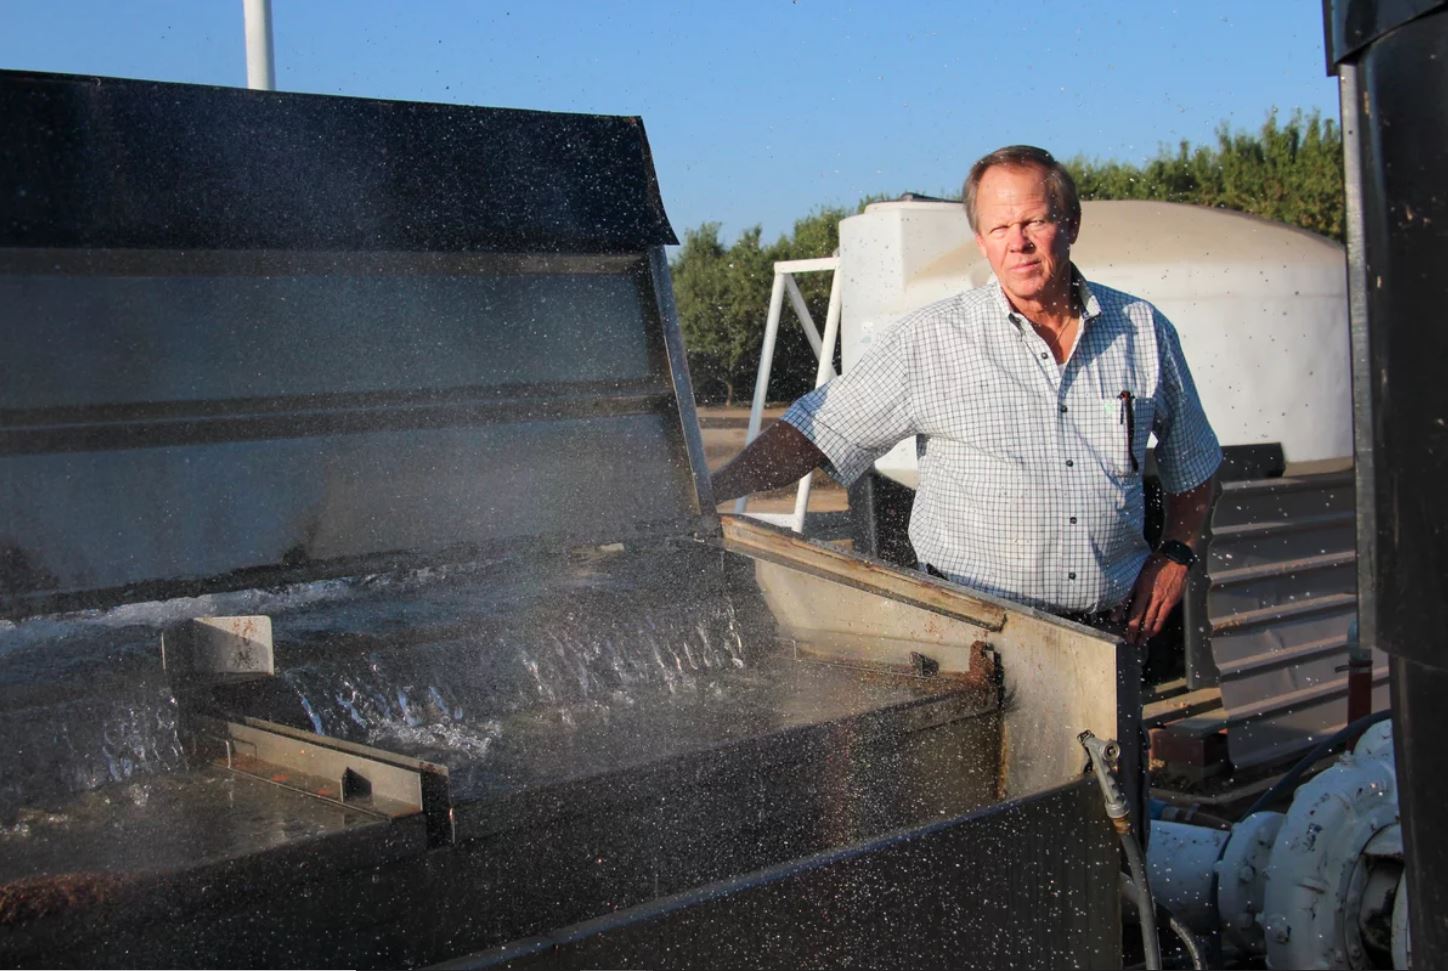 Rick Cosyns stands next to his farm's well, a large metal container with water flowing inside.